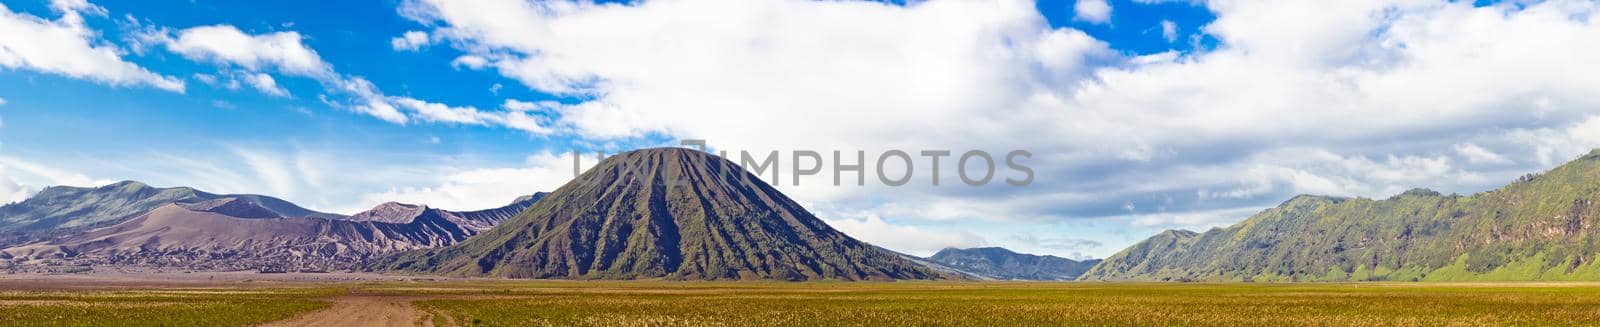 Panoramic view of volcanic landscape against blue sky with cloud by dmitryz